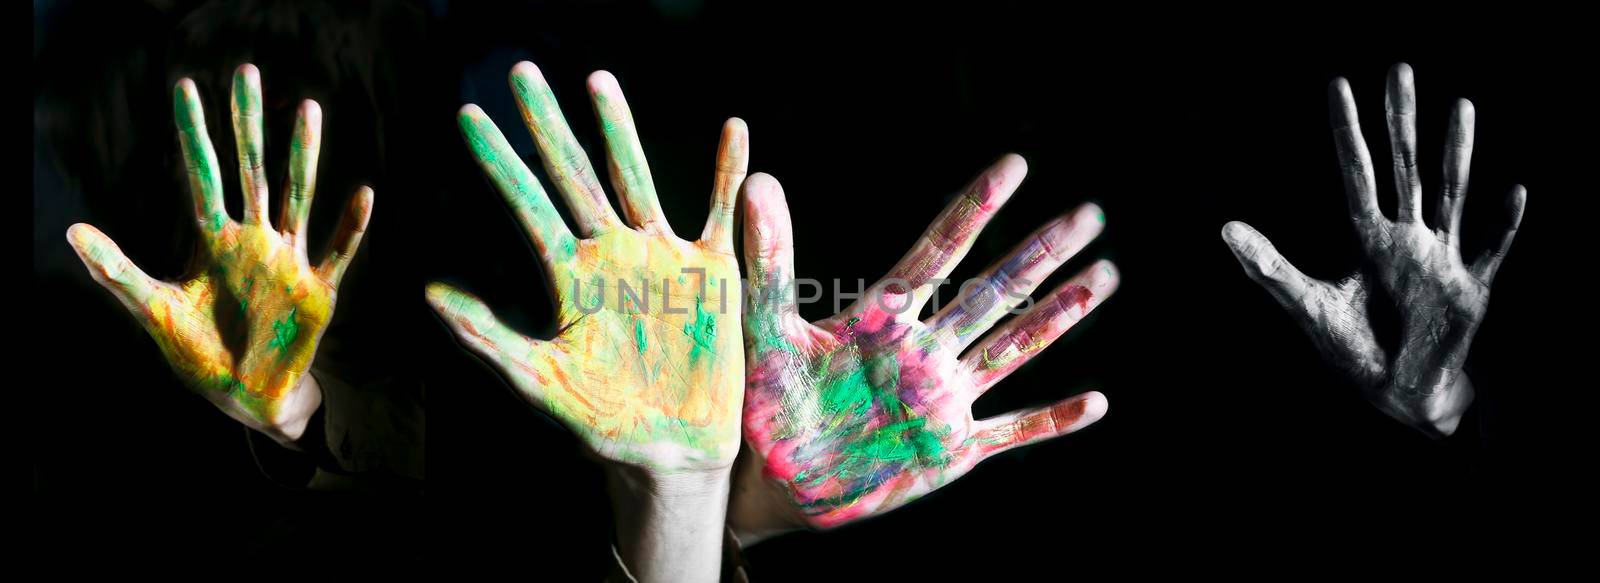 Close up shot of hands of children with some paint over it isolated over a black background, horizontal shot. by mirzamlk